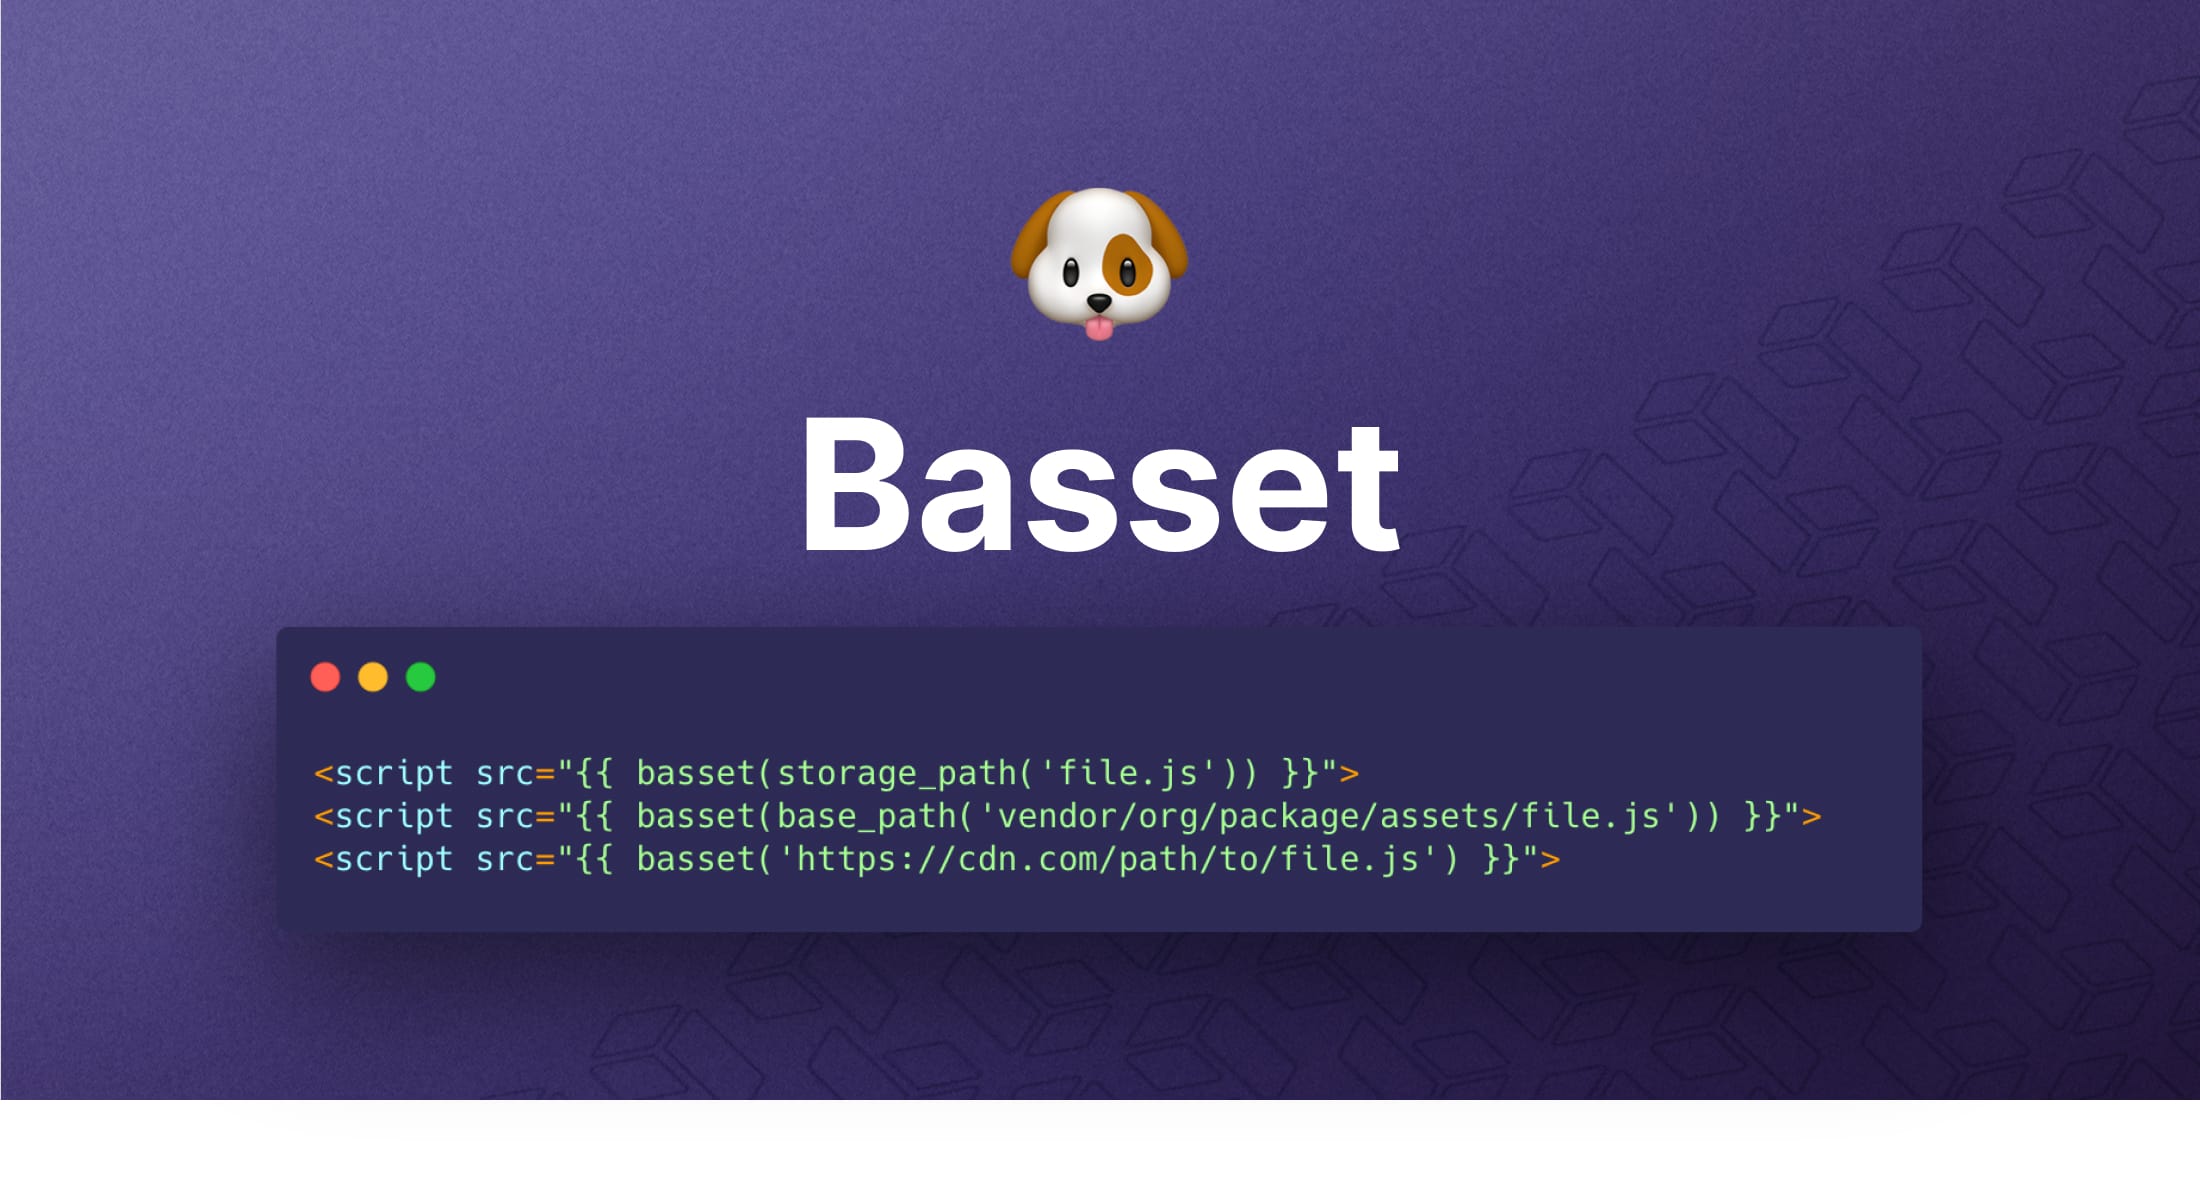 Basset is an alternative way to load CSS & JS assets